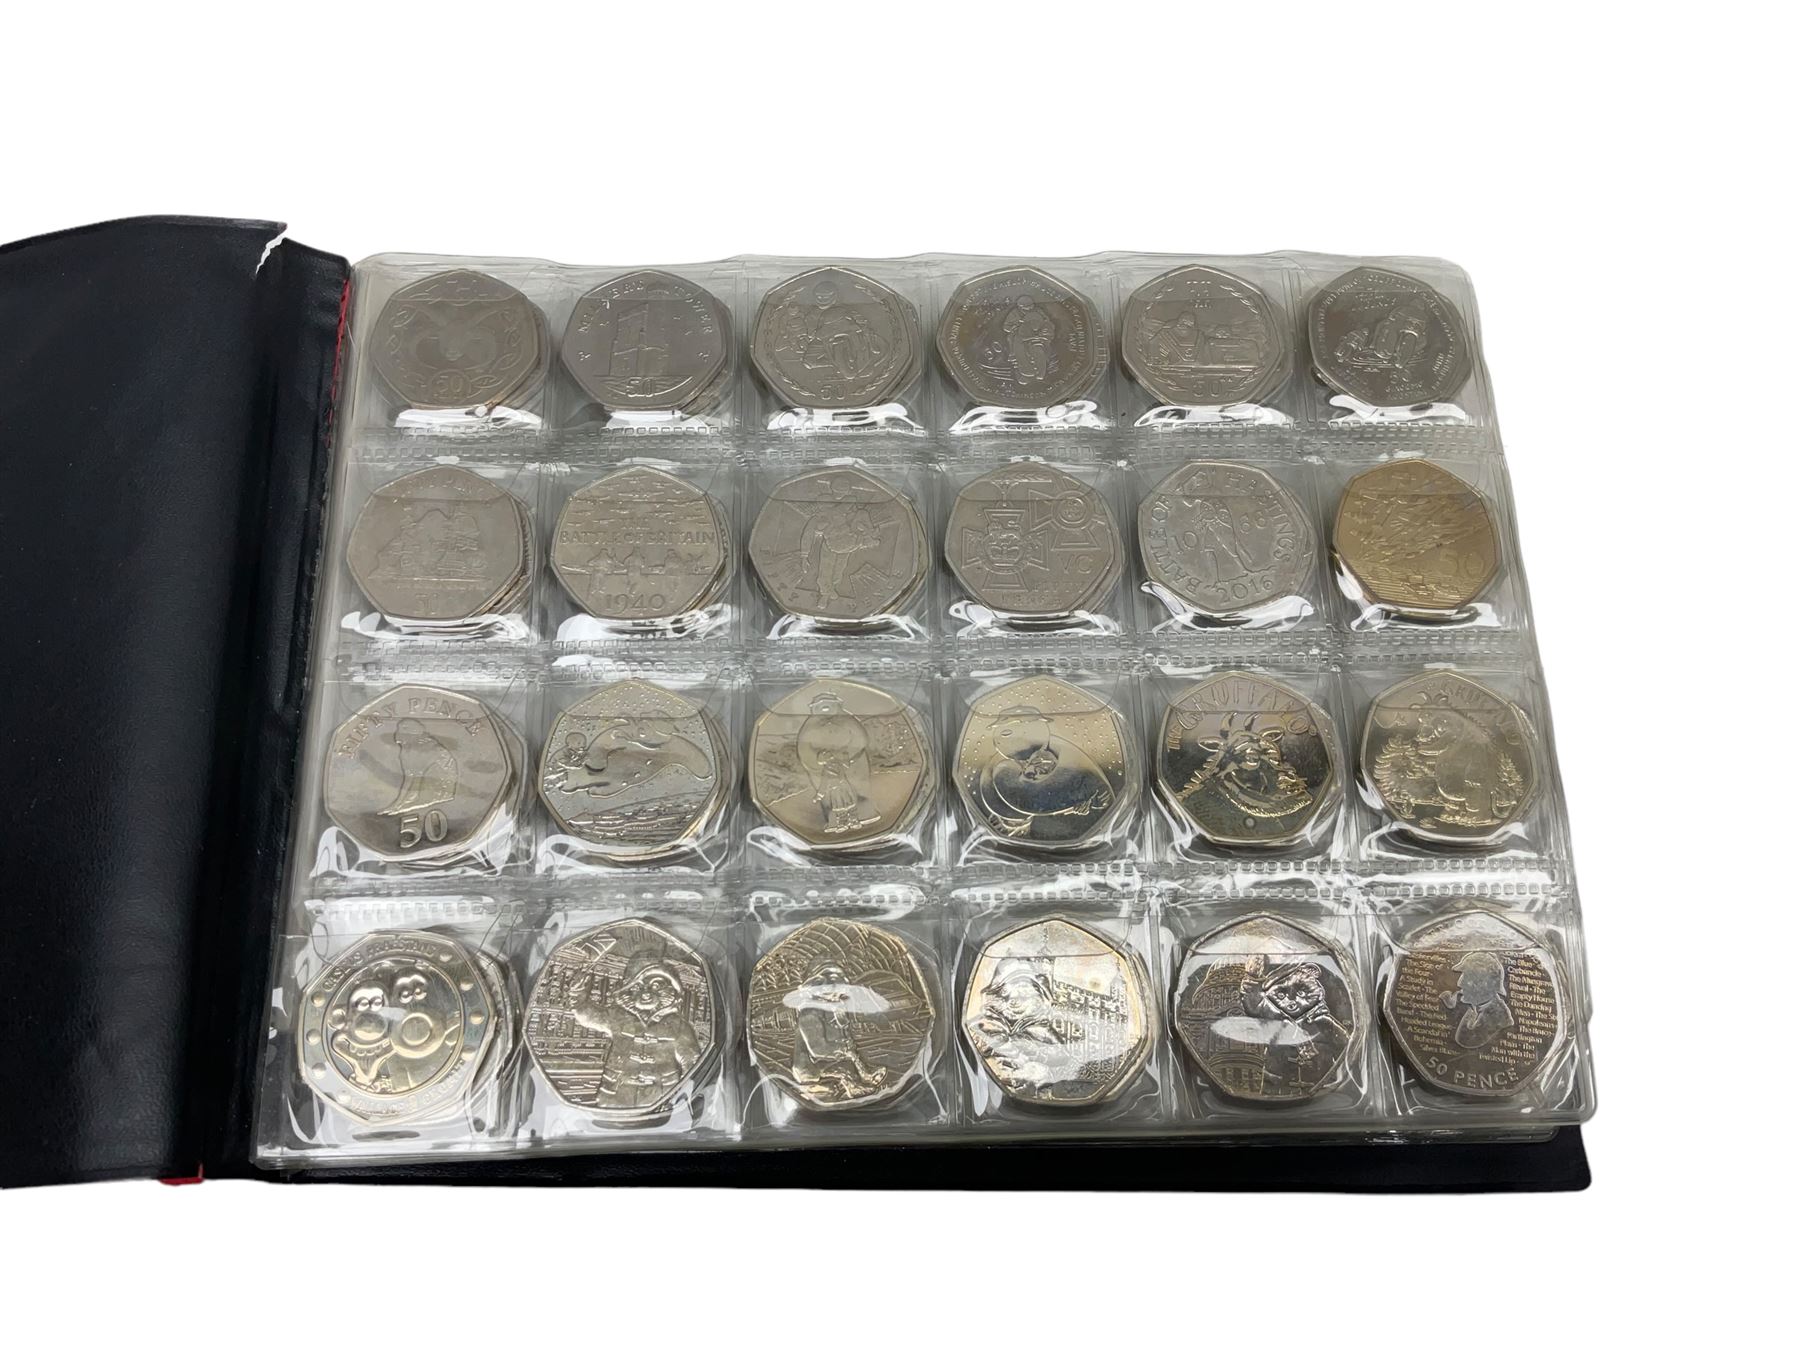 Mostly Great British Queen Elizabeth II commemorative coins from circulation - Image 2 of 10